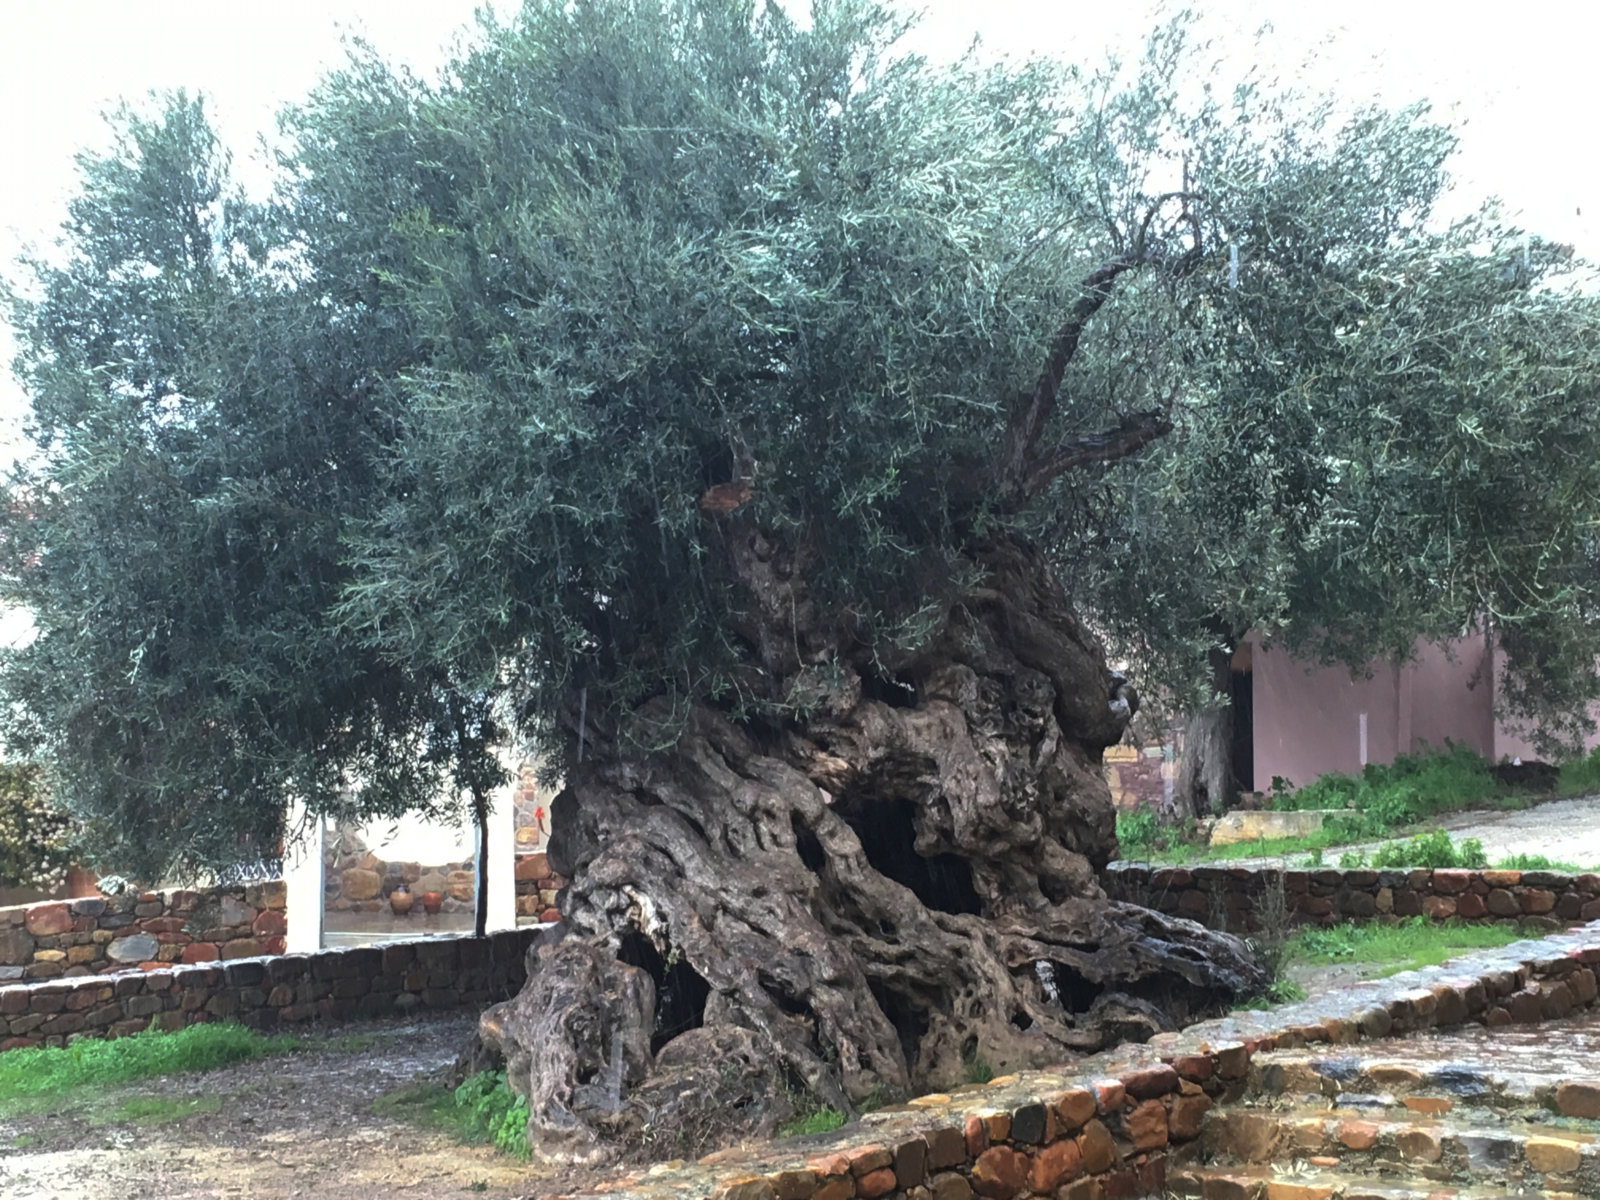 In Kreta. One of the oldest olive trees in the world.